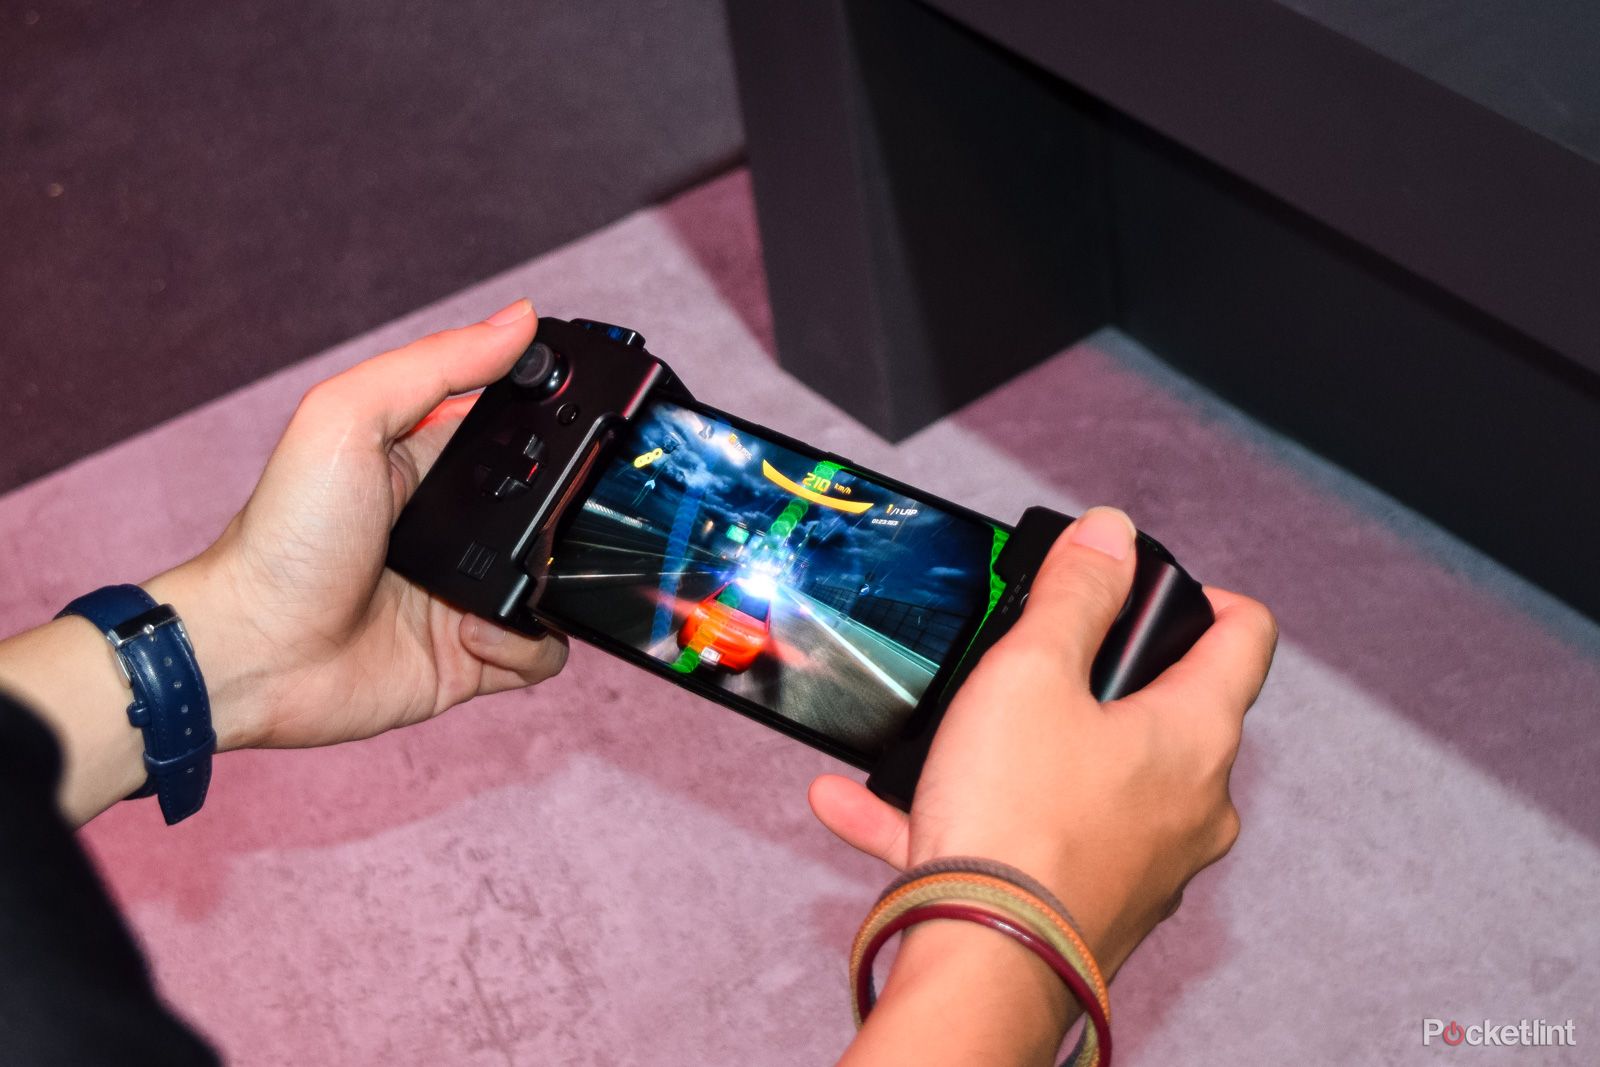 Asus Rog Phone Initial Review The Serious Flagship Smartphone For Pubg Gamers And More image 16